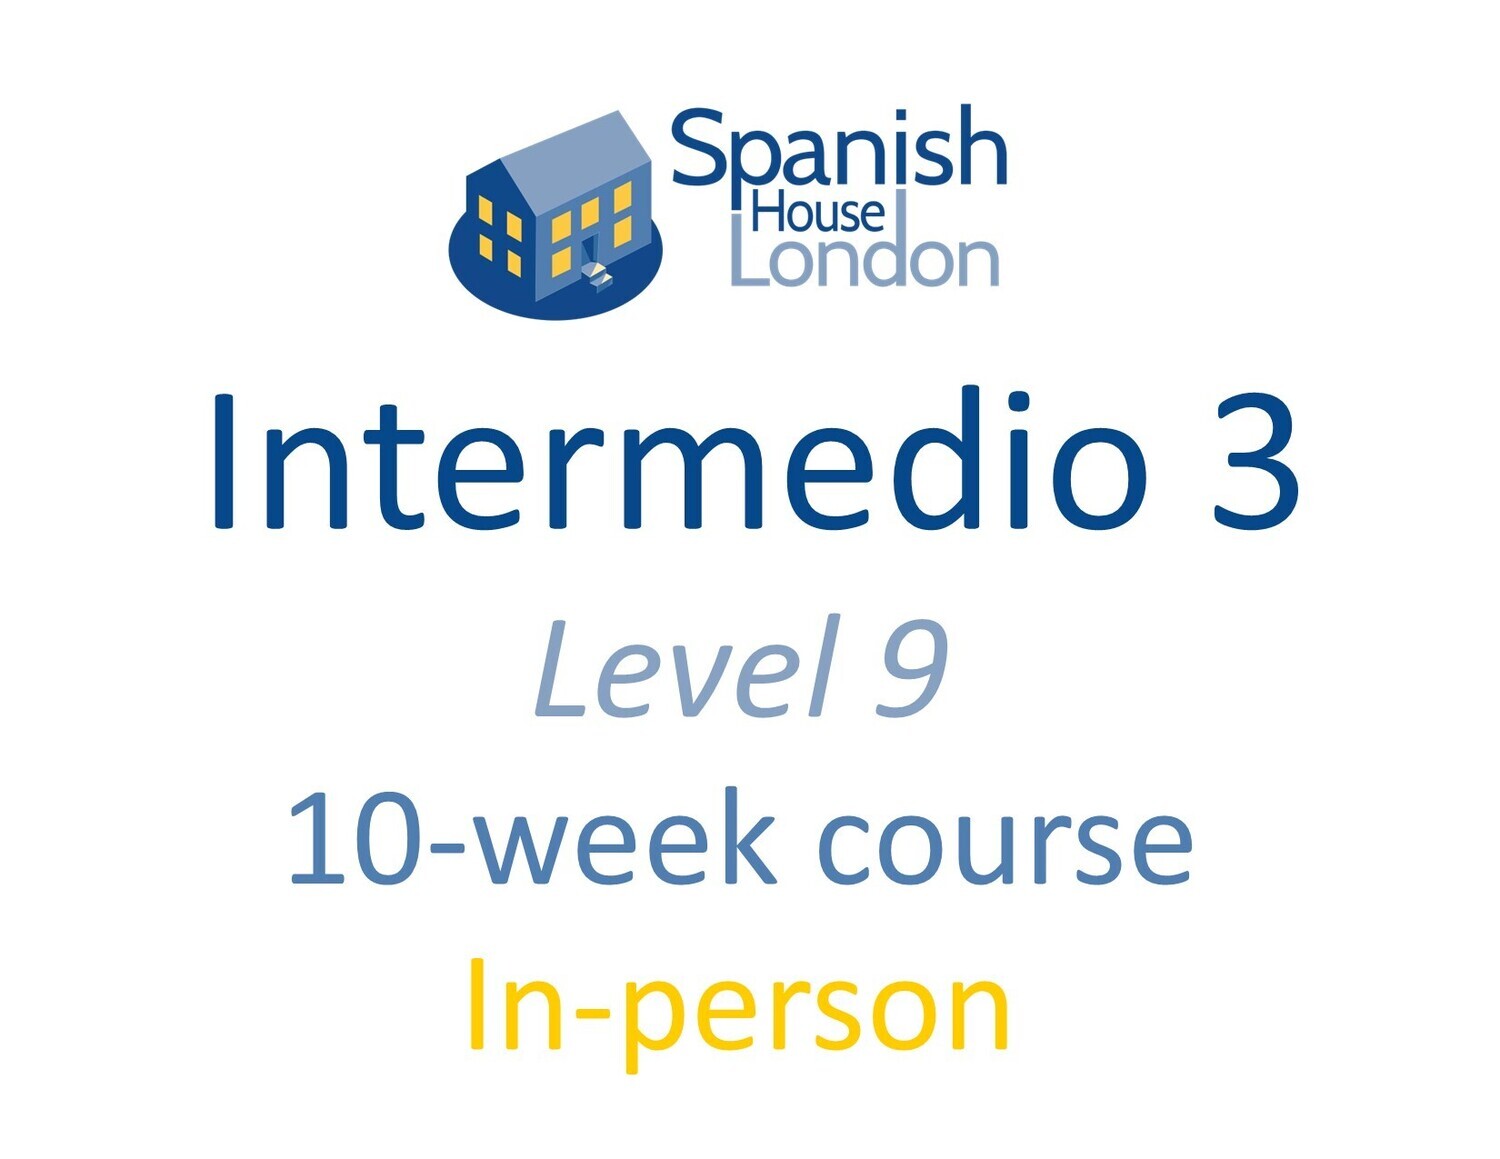 Intermedio 3 Course starting on 26th September at 7.30pm in Euston / King's Cross